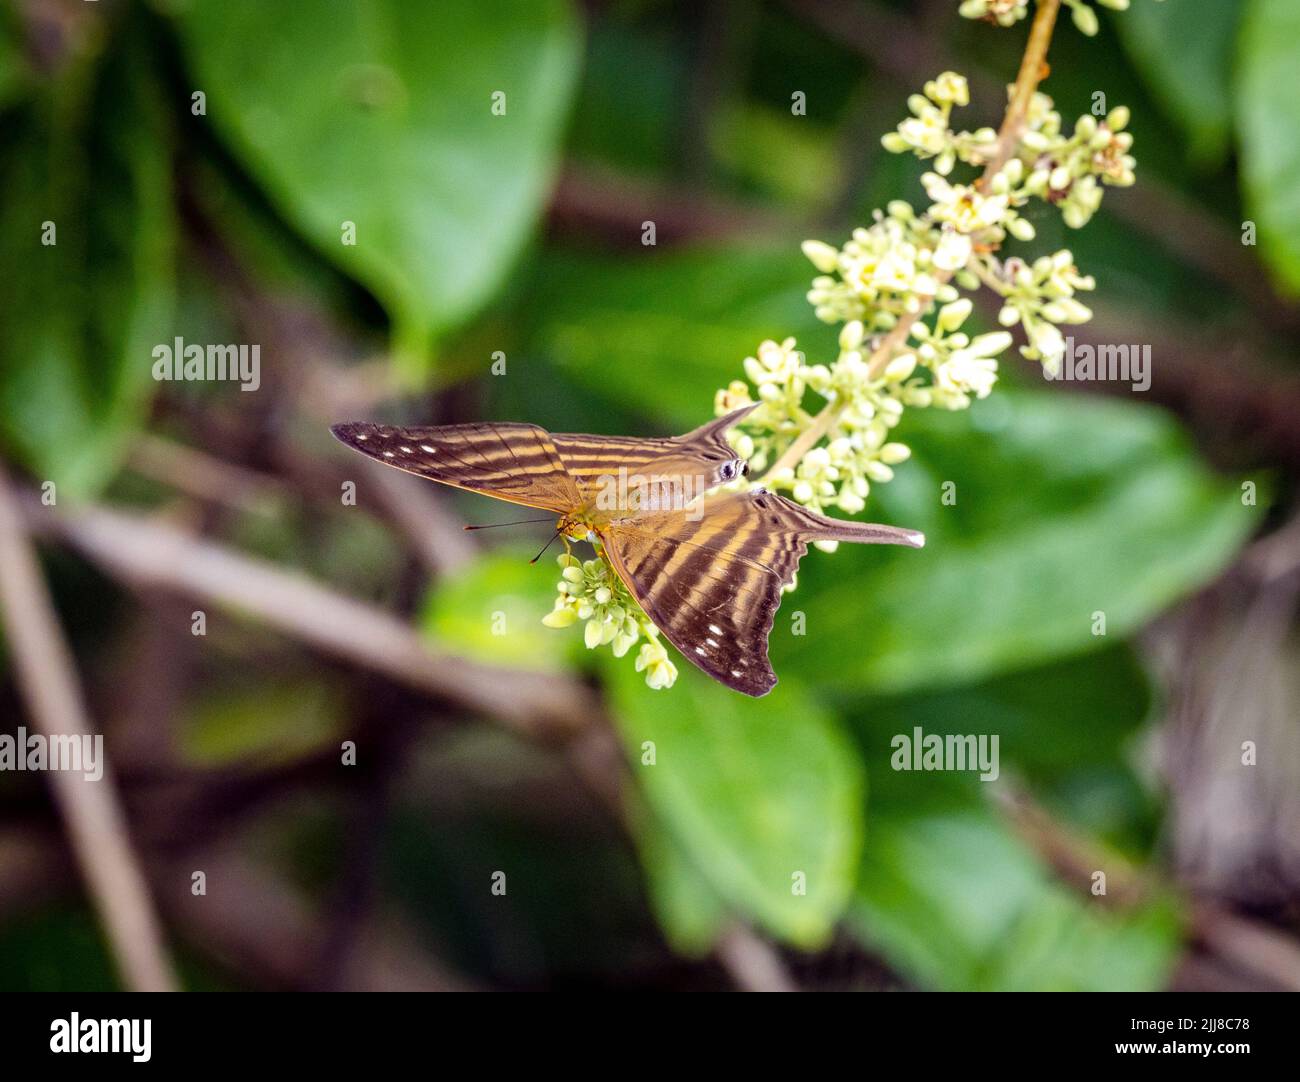 Many-banded daggerwing butterfly on white flower, Costa Rica Stock Photo